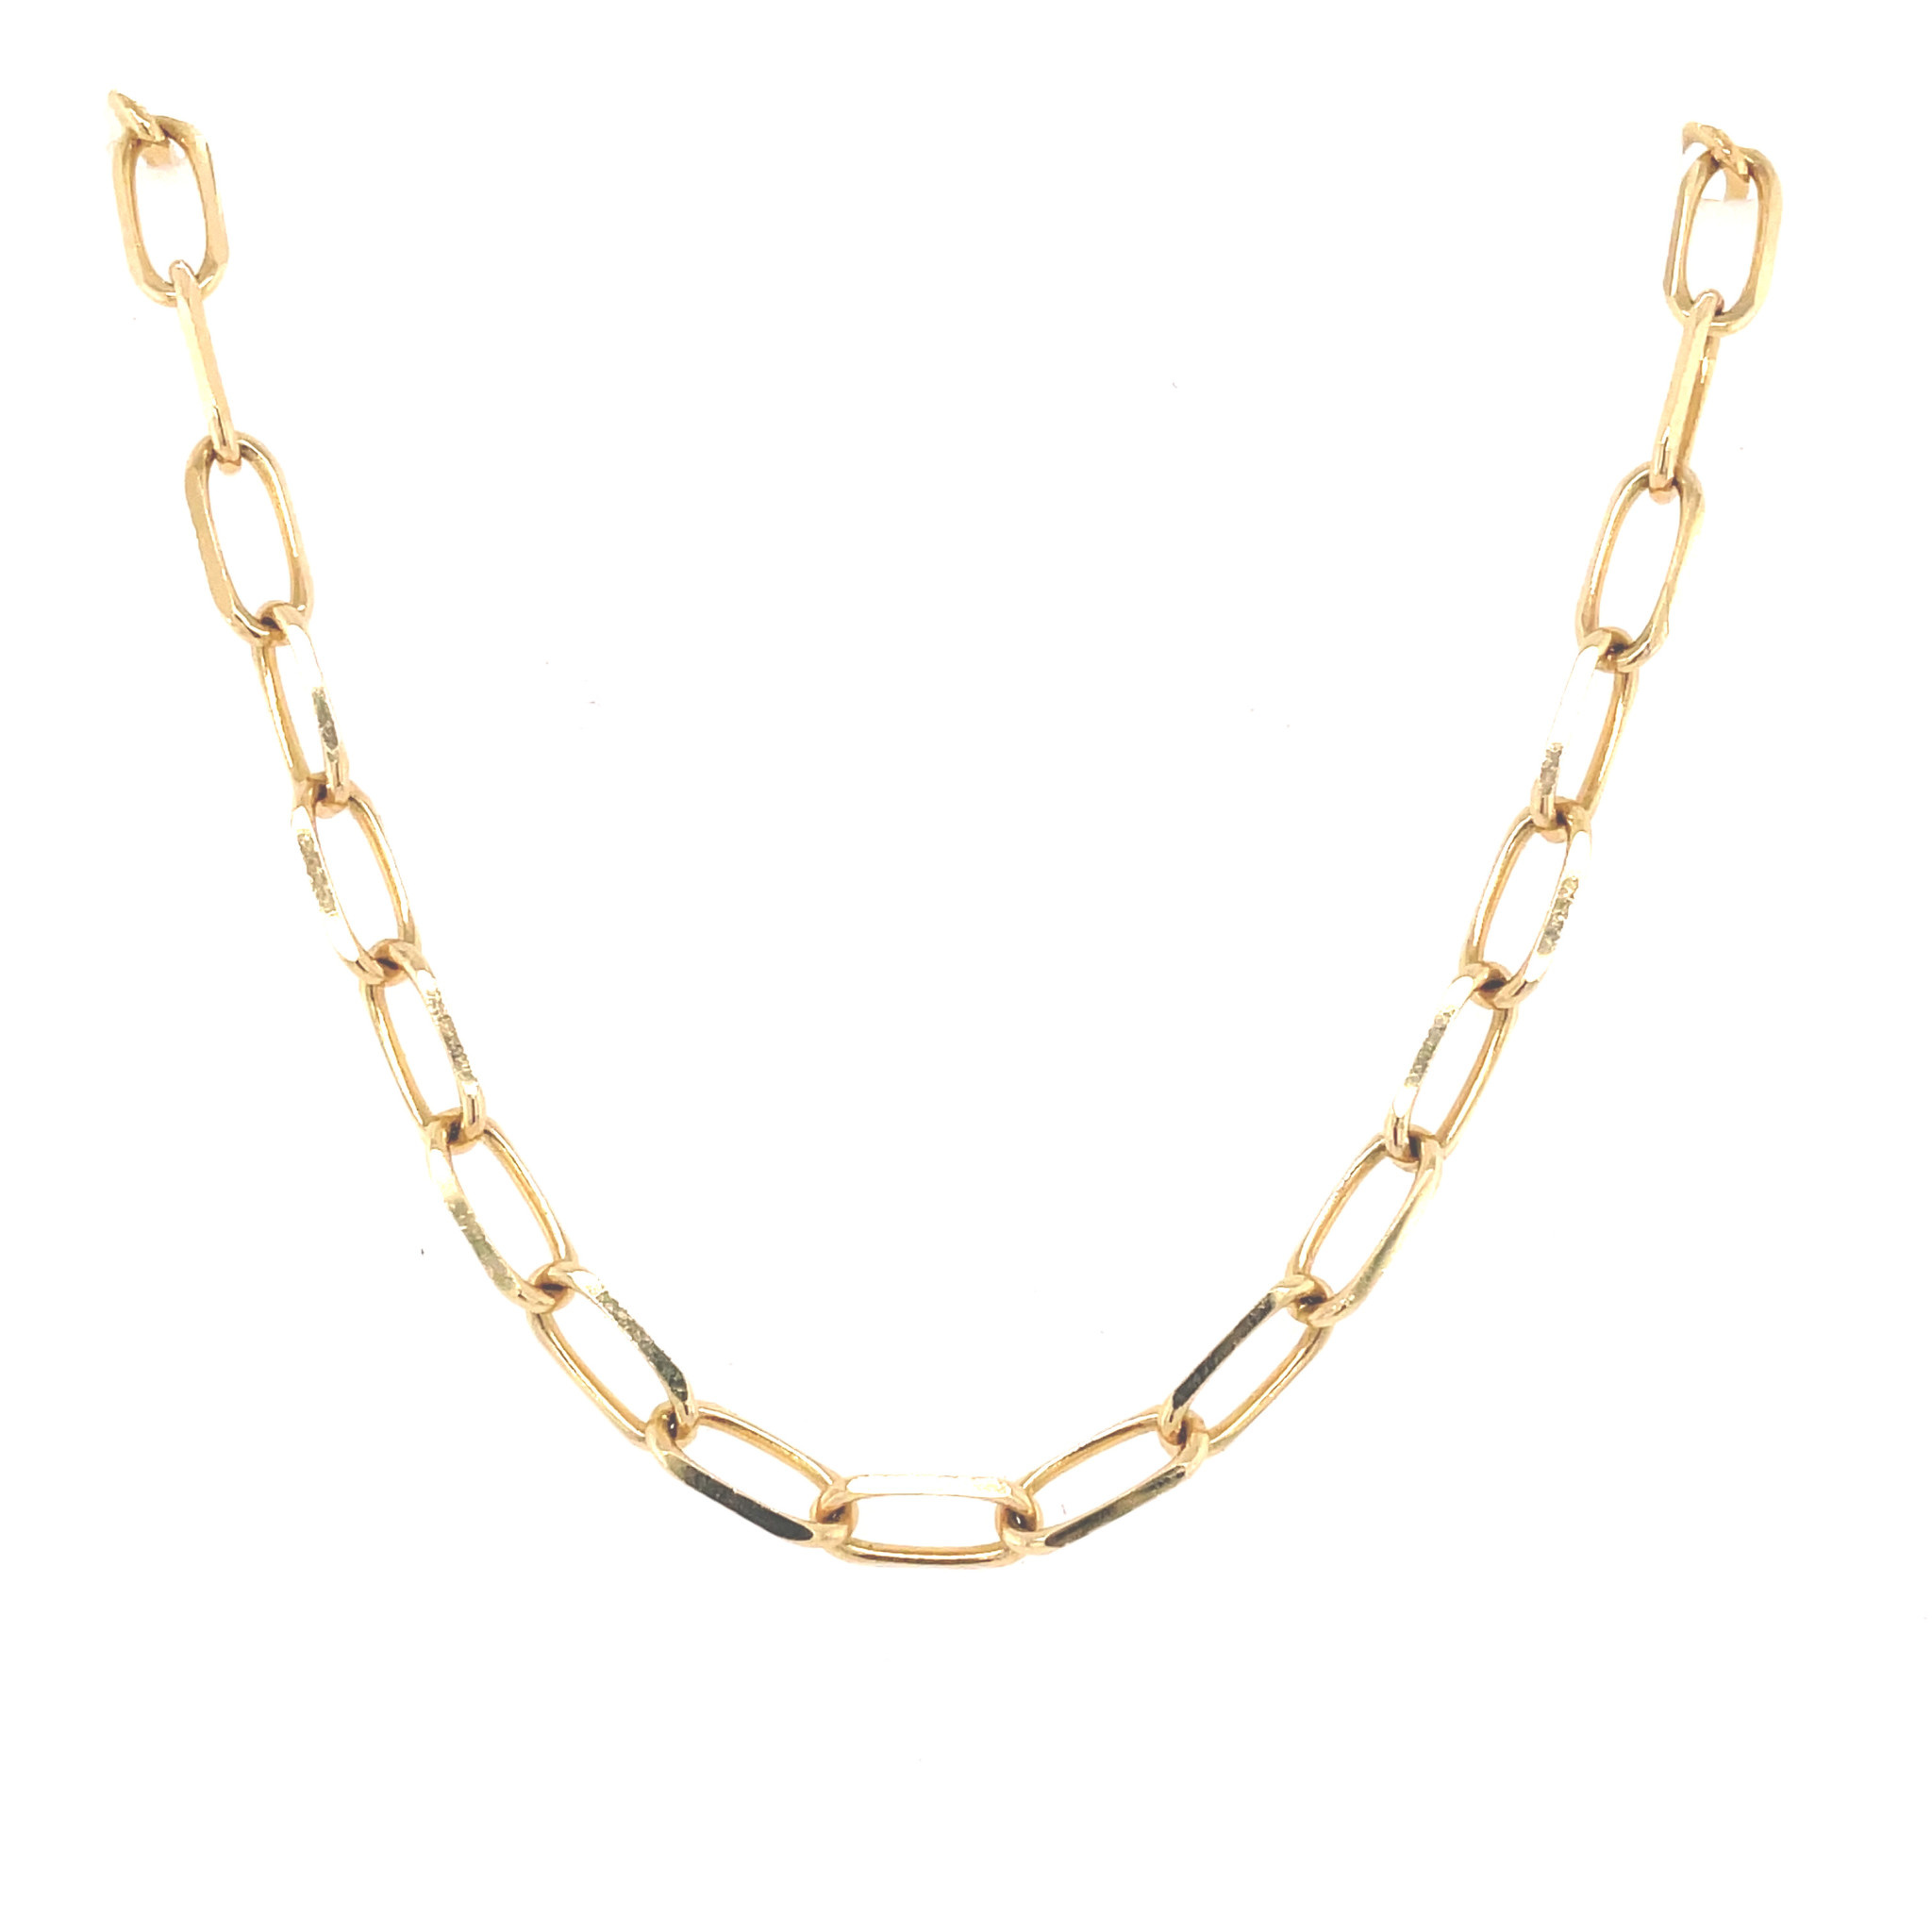 55935 14K  YELLOW GOLD 20" SOLID  PAPERCLIP  CHAIN